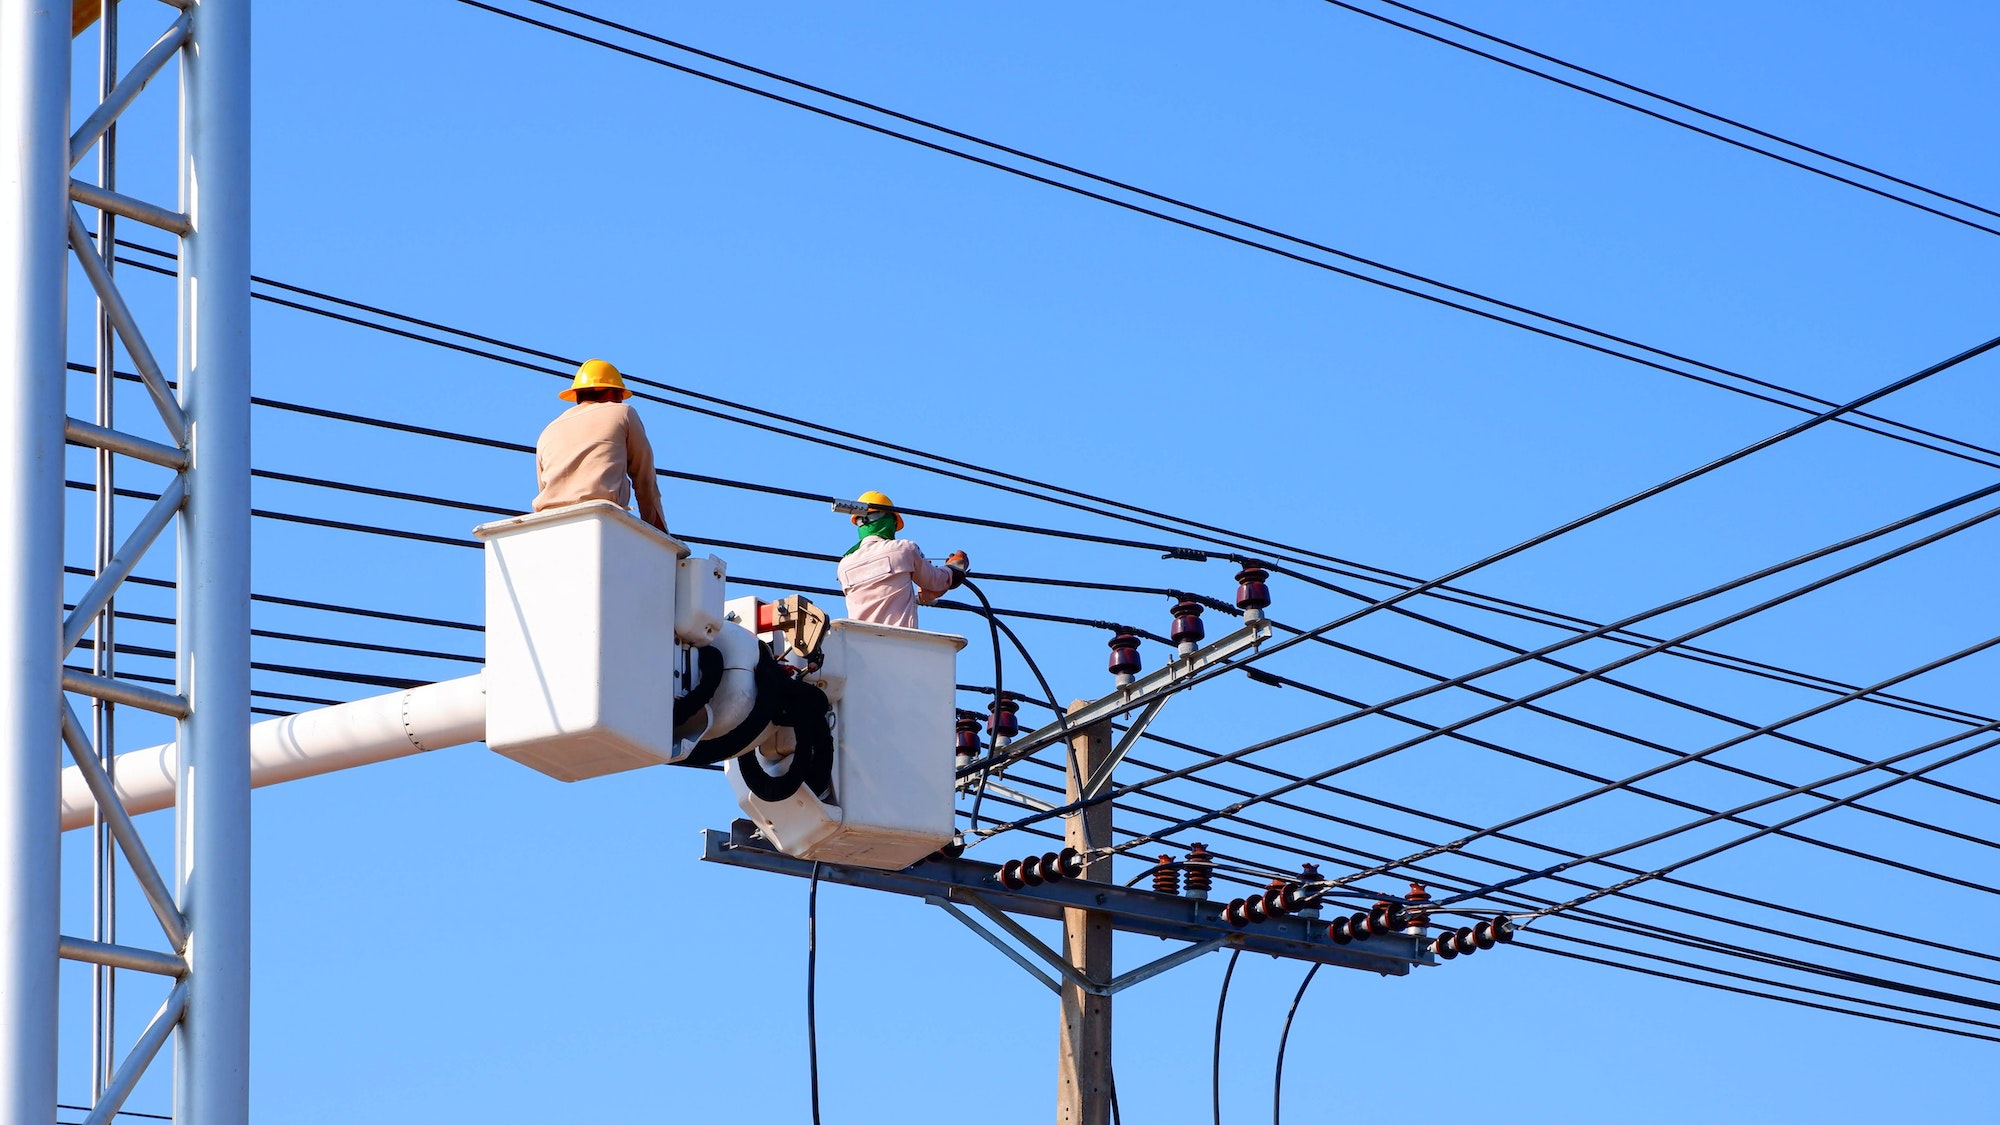 Two electricians on bucket boom truck installing electrical system on power pole against blue sky